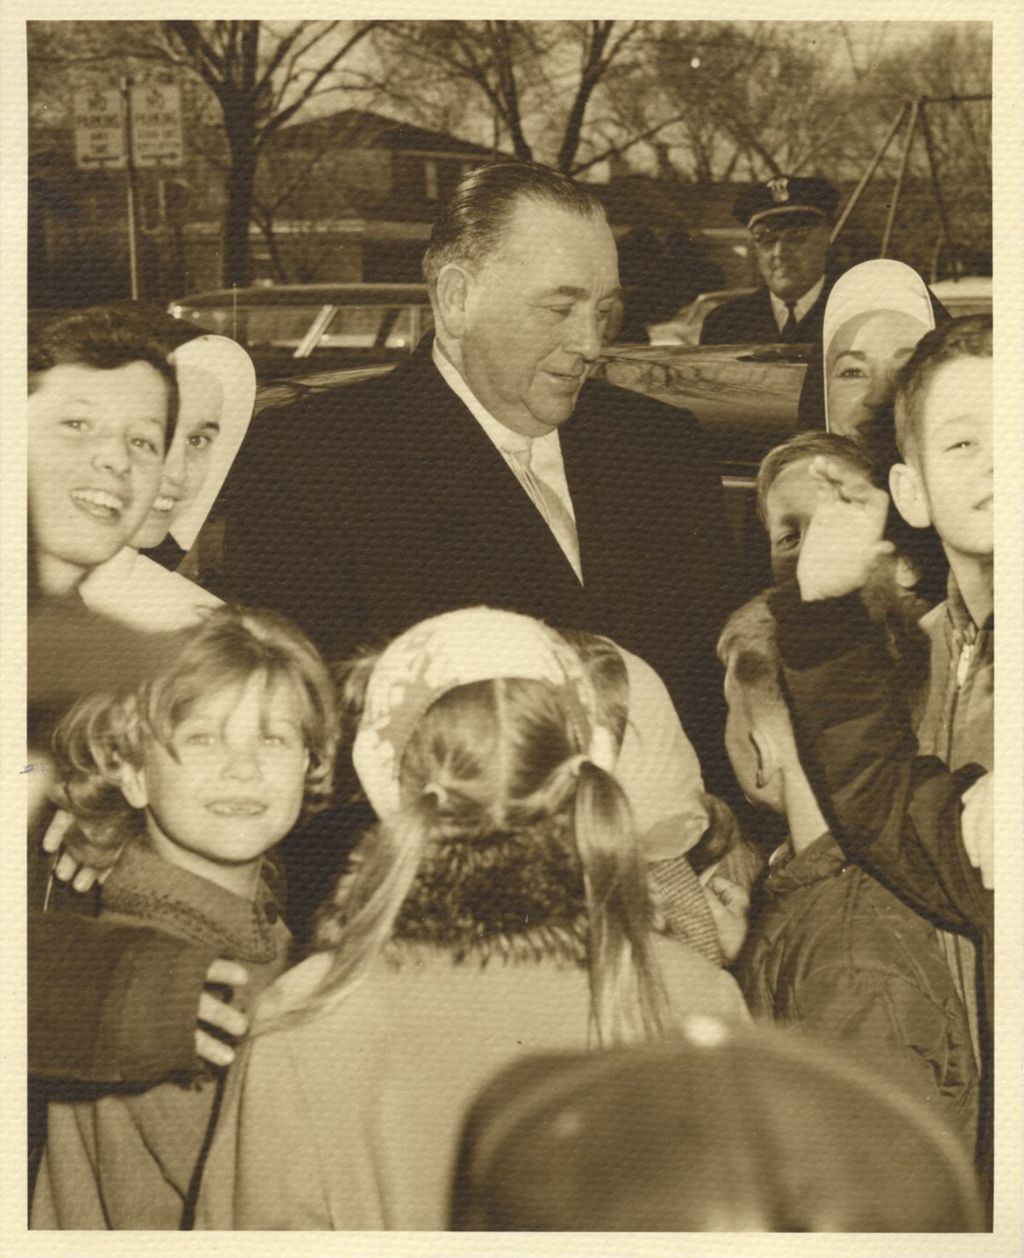 Miniature of Richard J. Daley with children and nuns